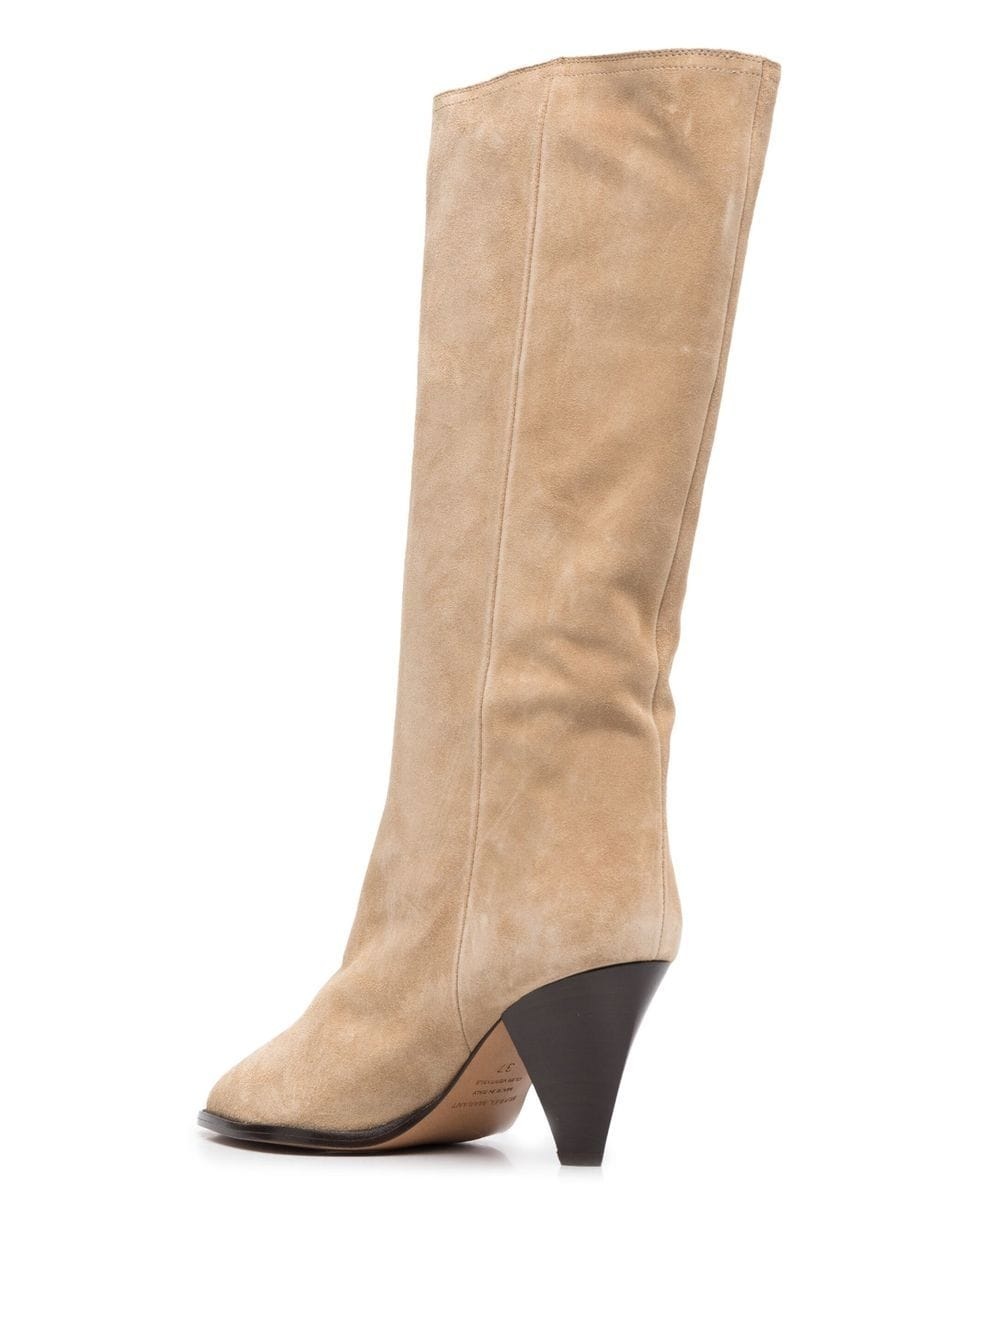 80mm heeled suede boots - 3